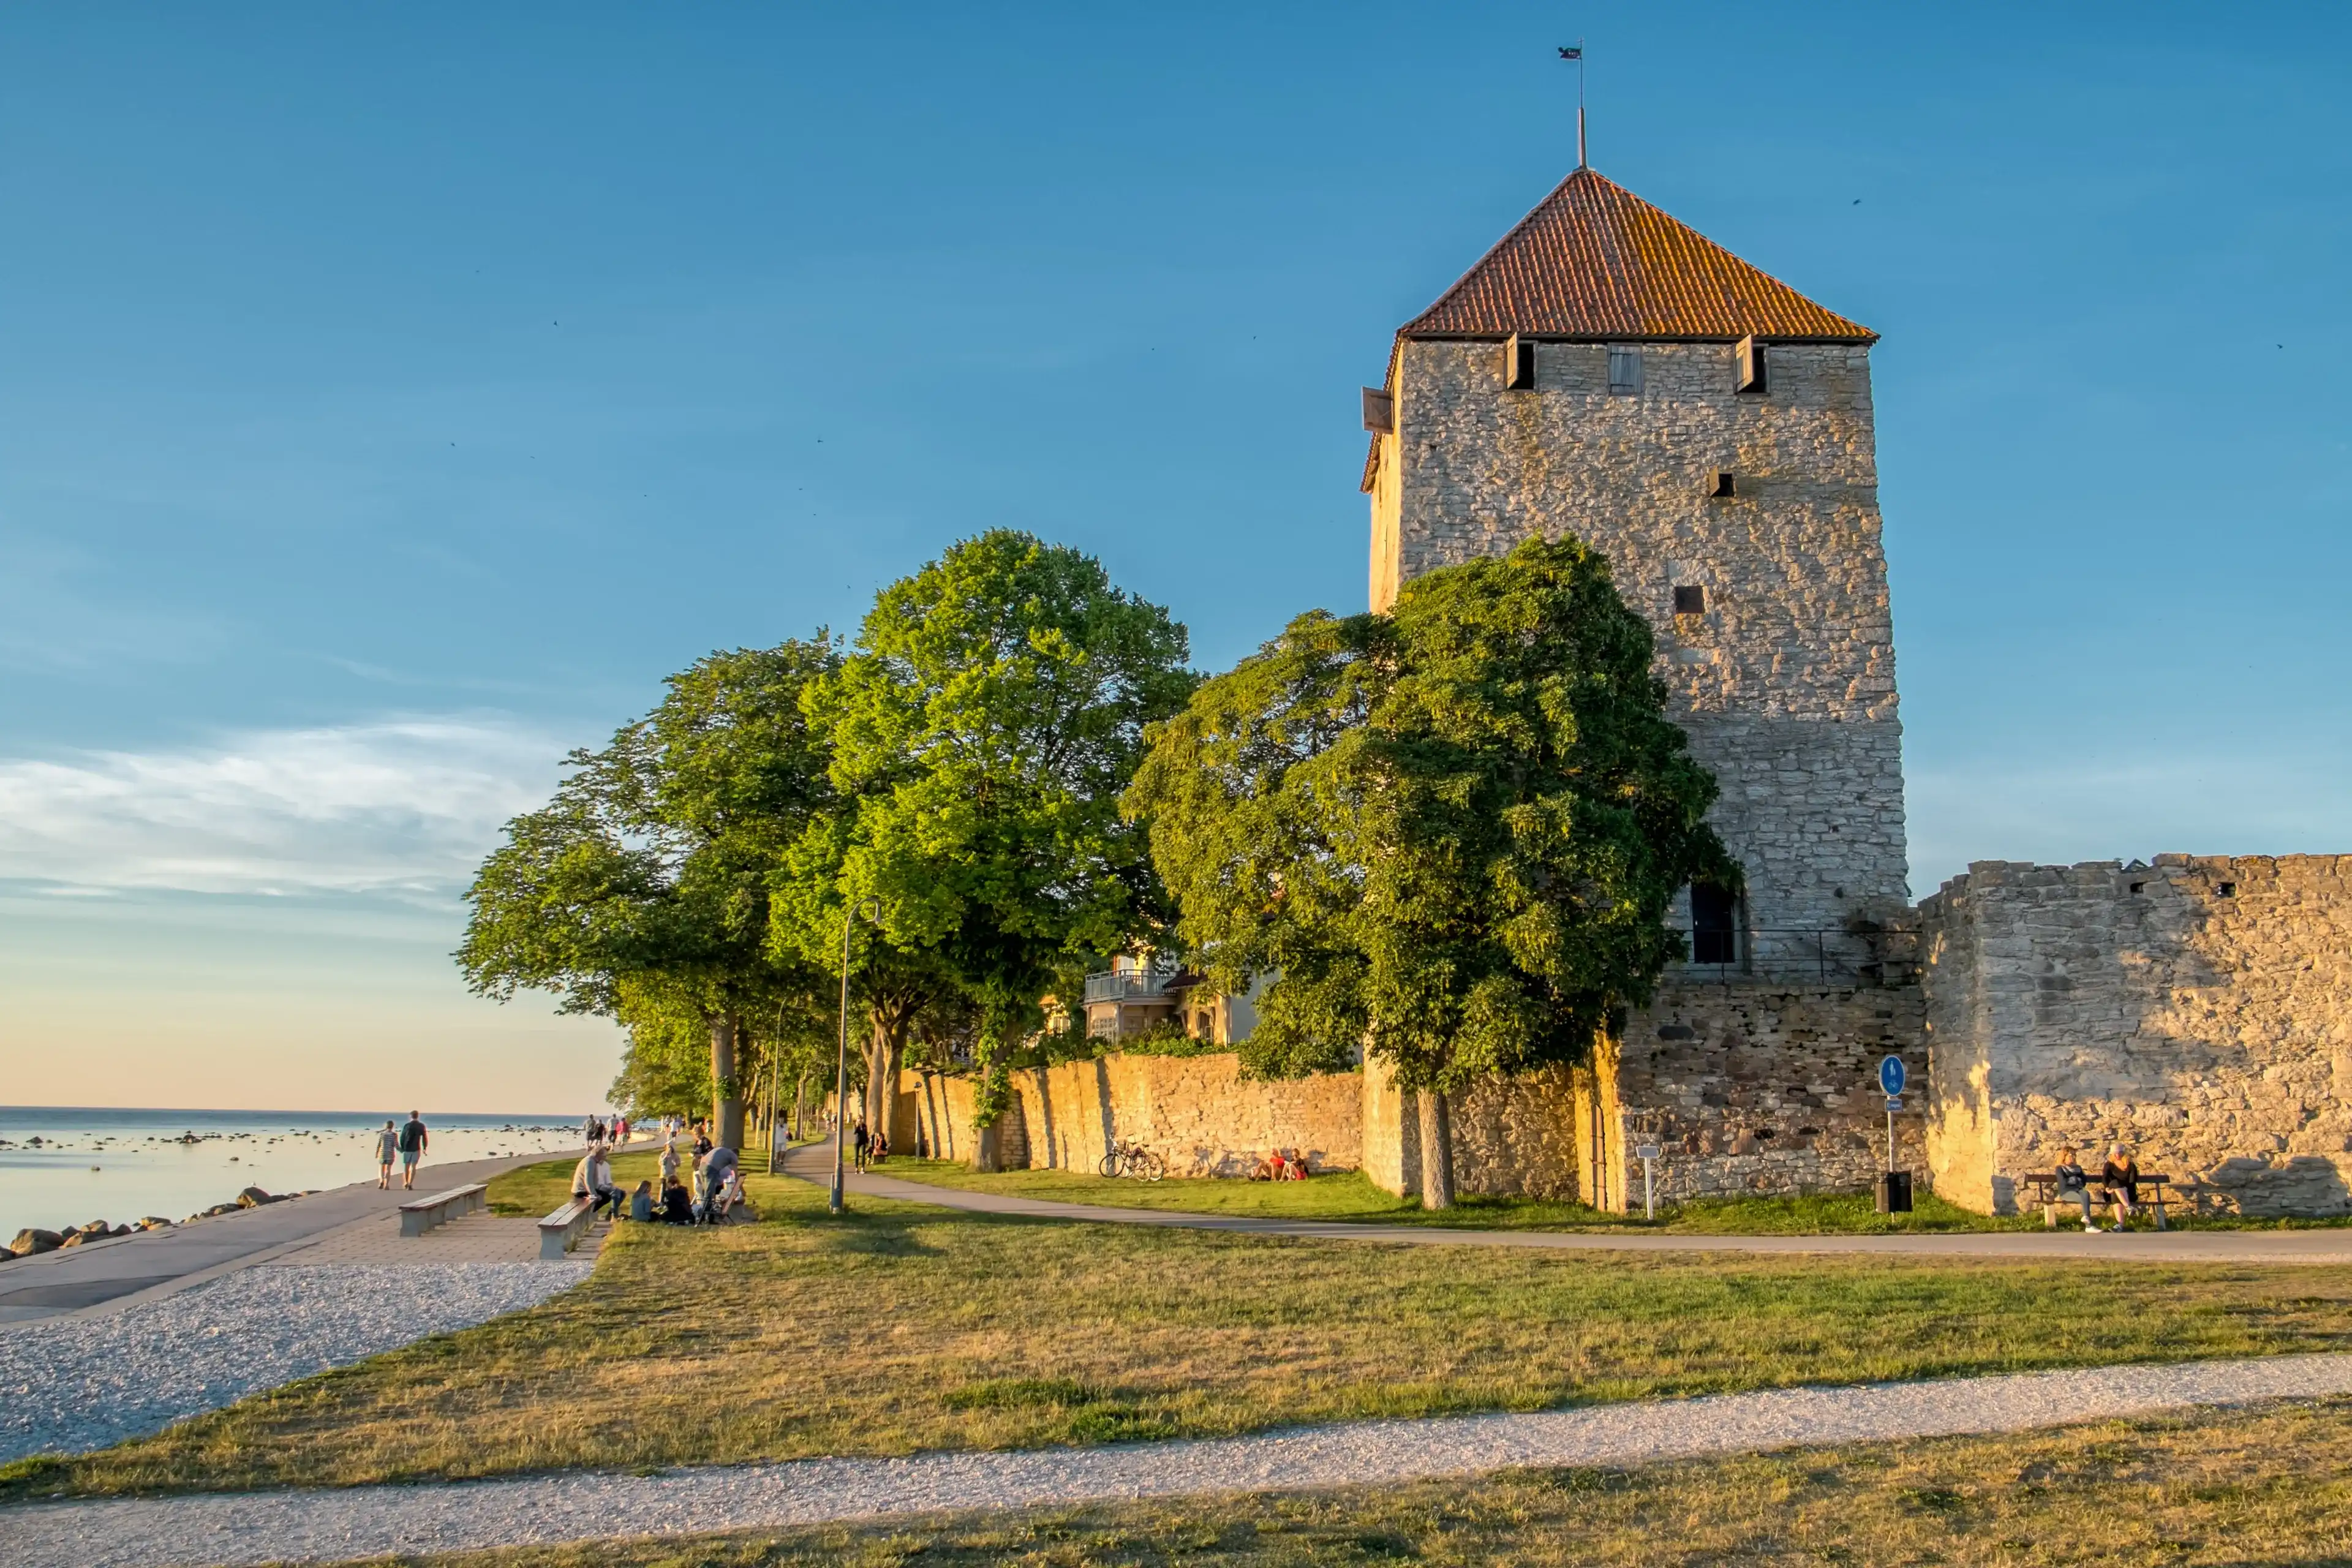 Best Visby hotels. Cheap hotels in Visby, Sweden